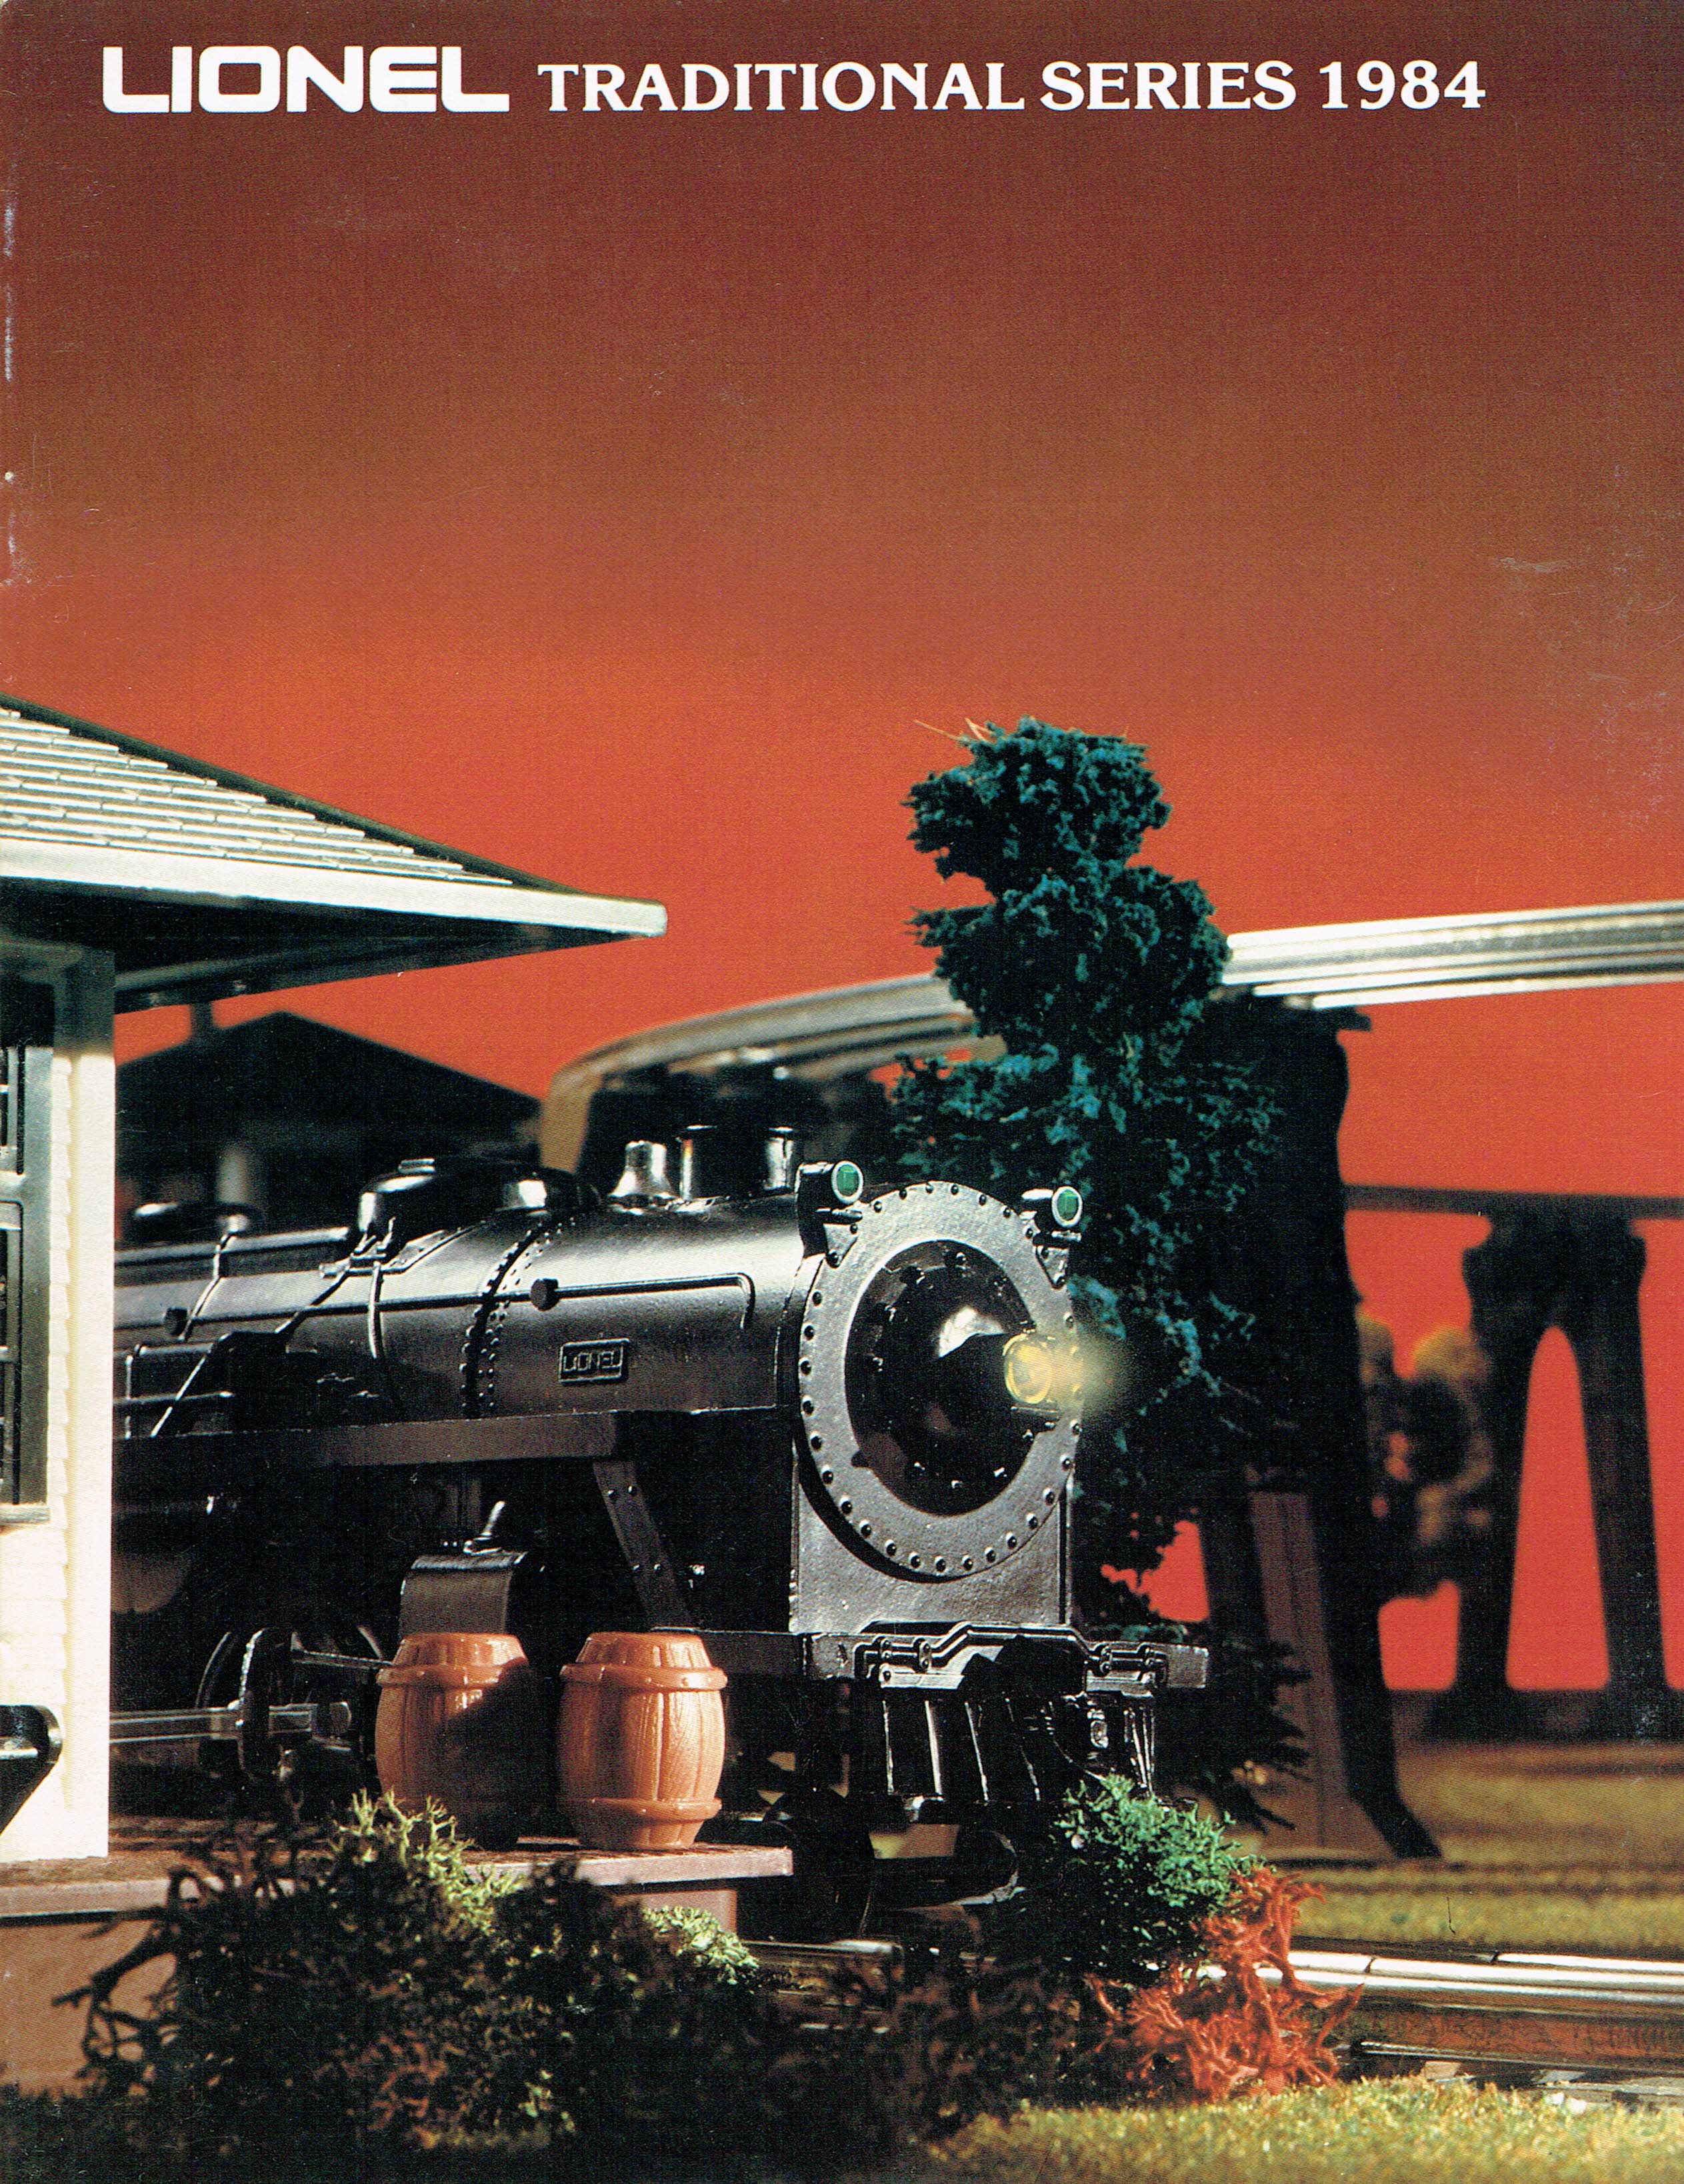 Lionel 1984 Traditional Series Catalog image